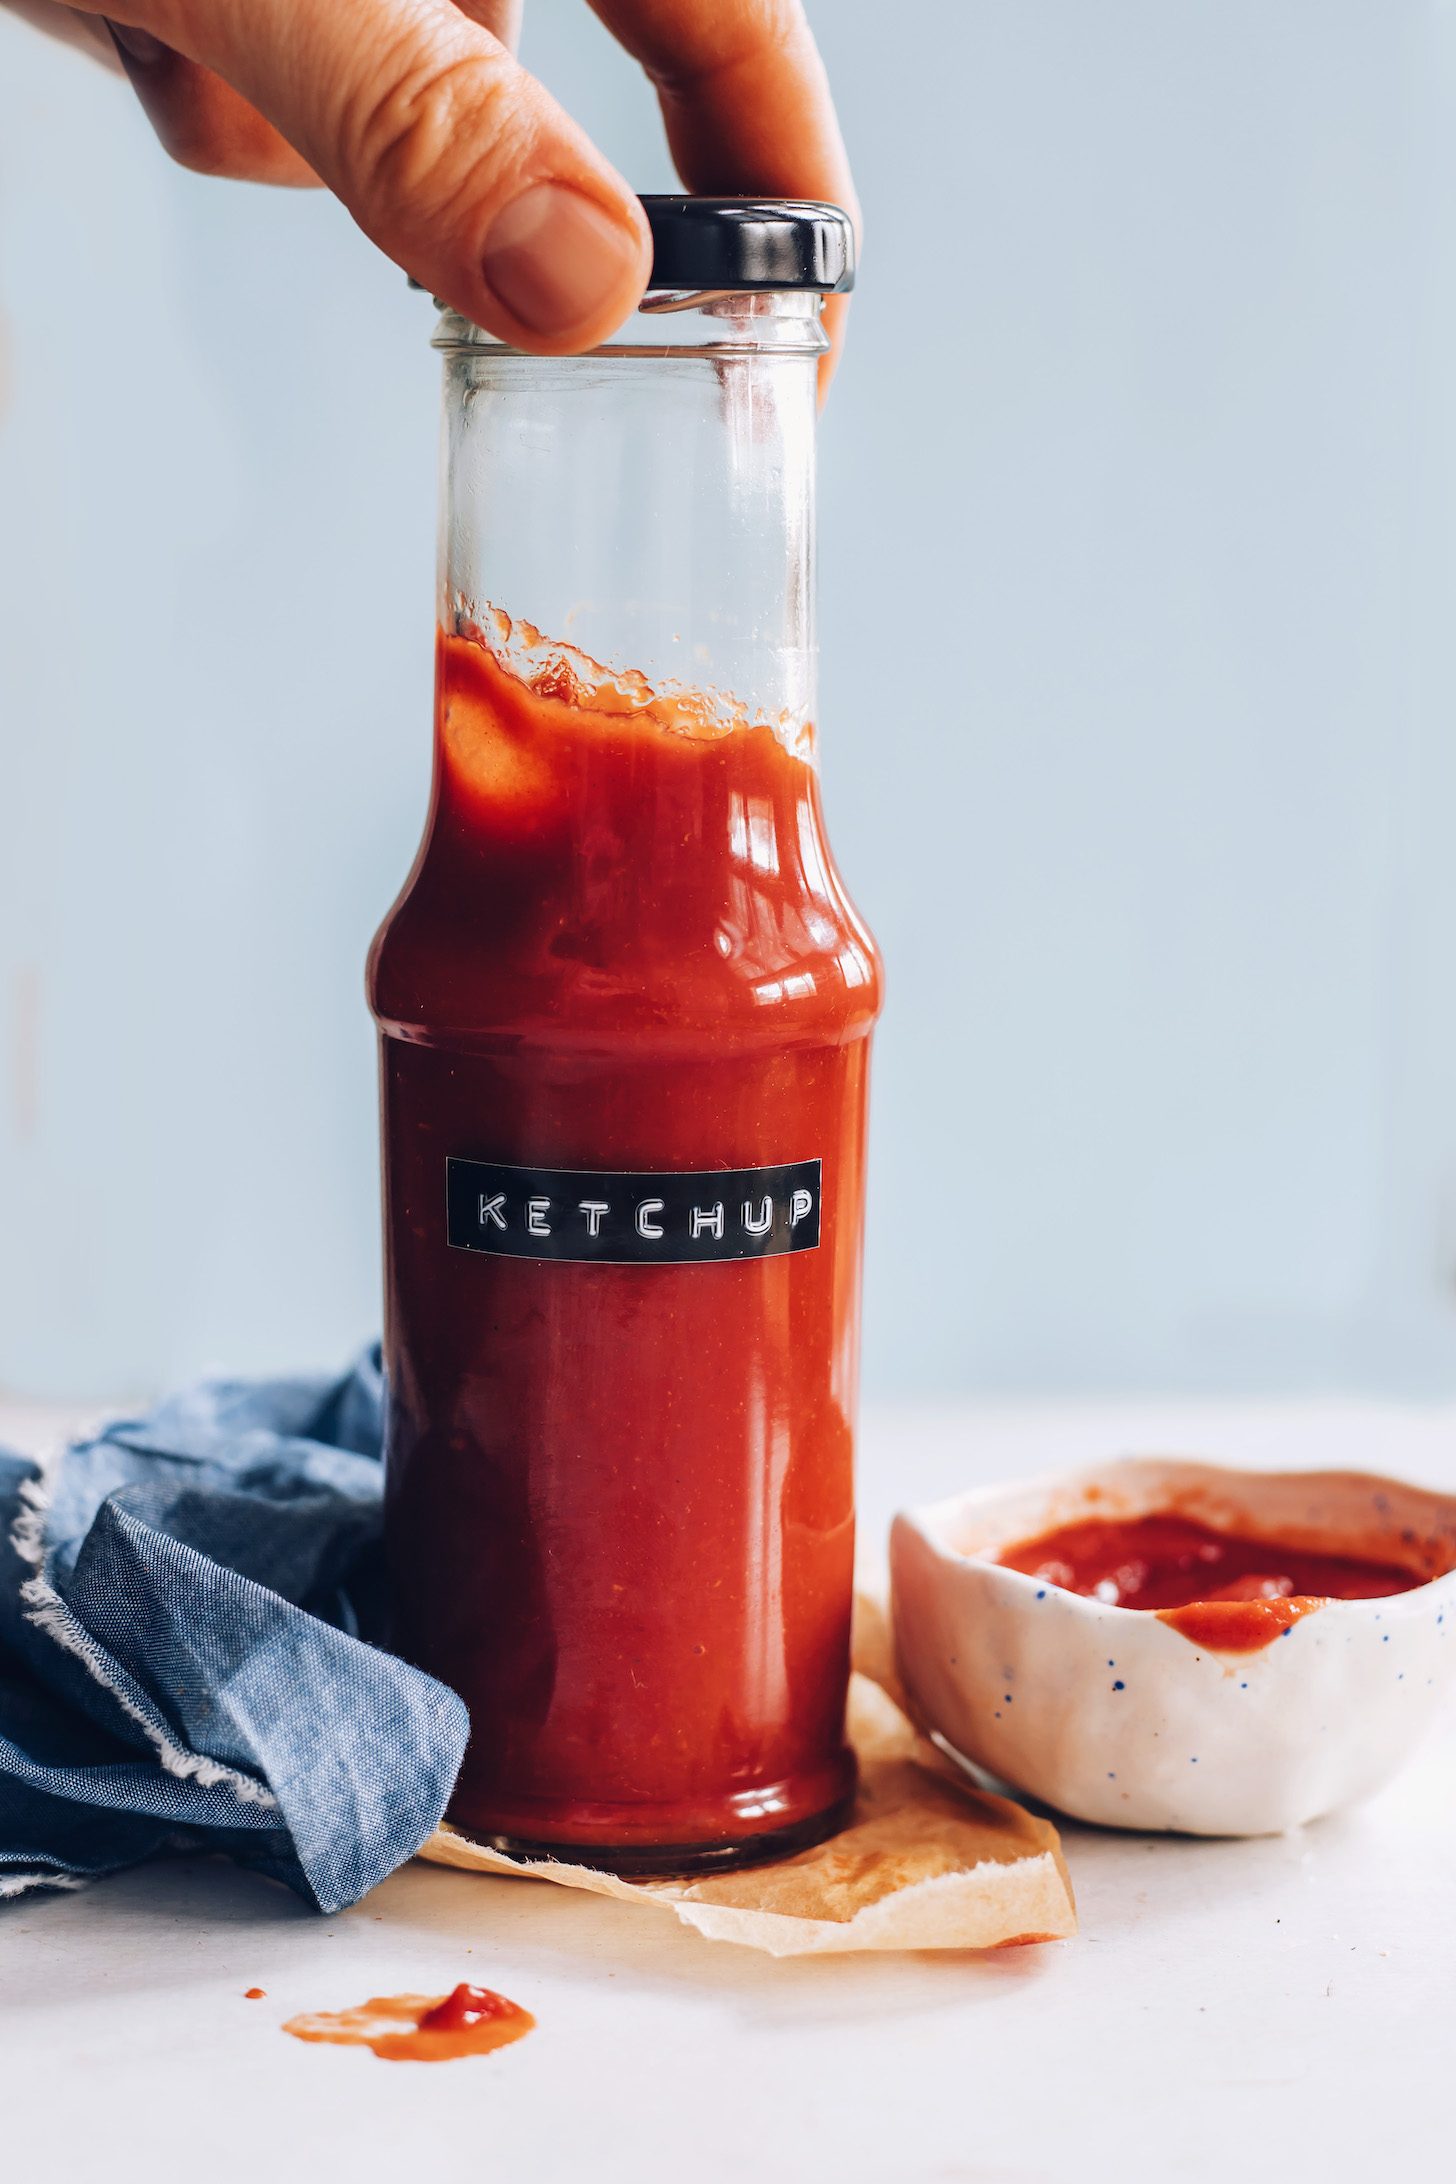 Holding the top of a bottle of homemade ketchup